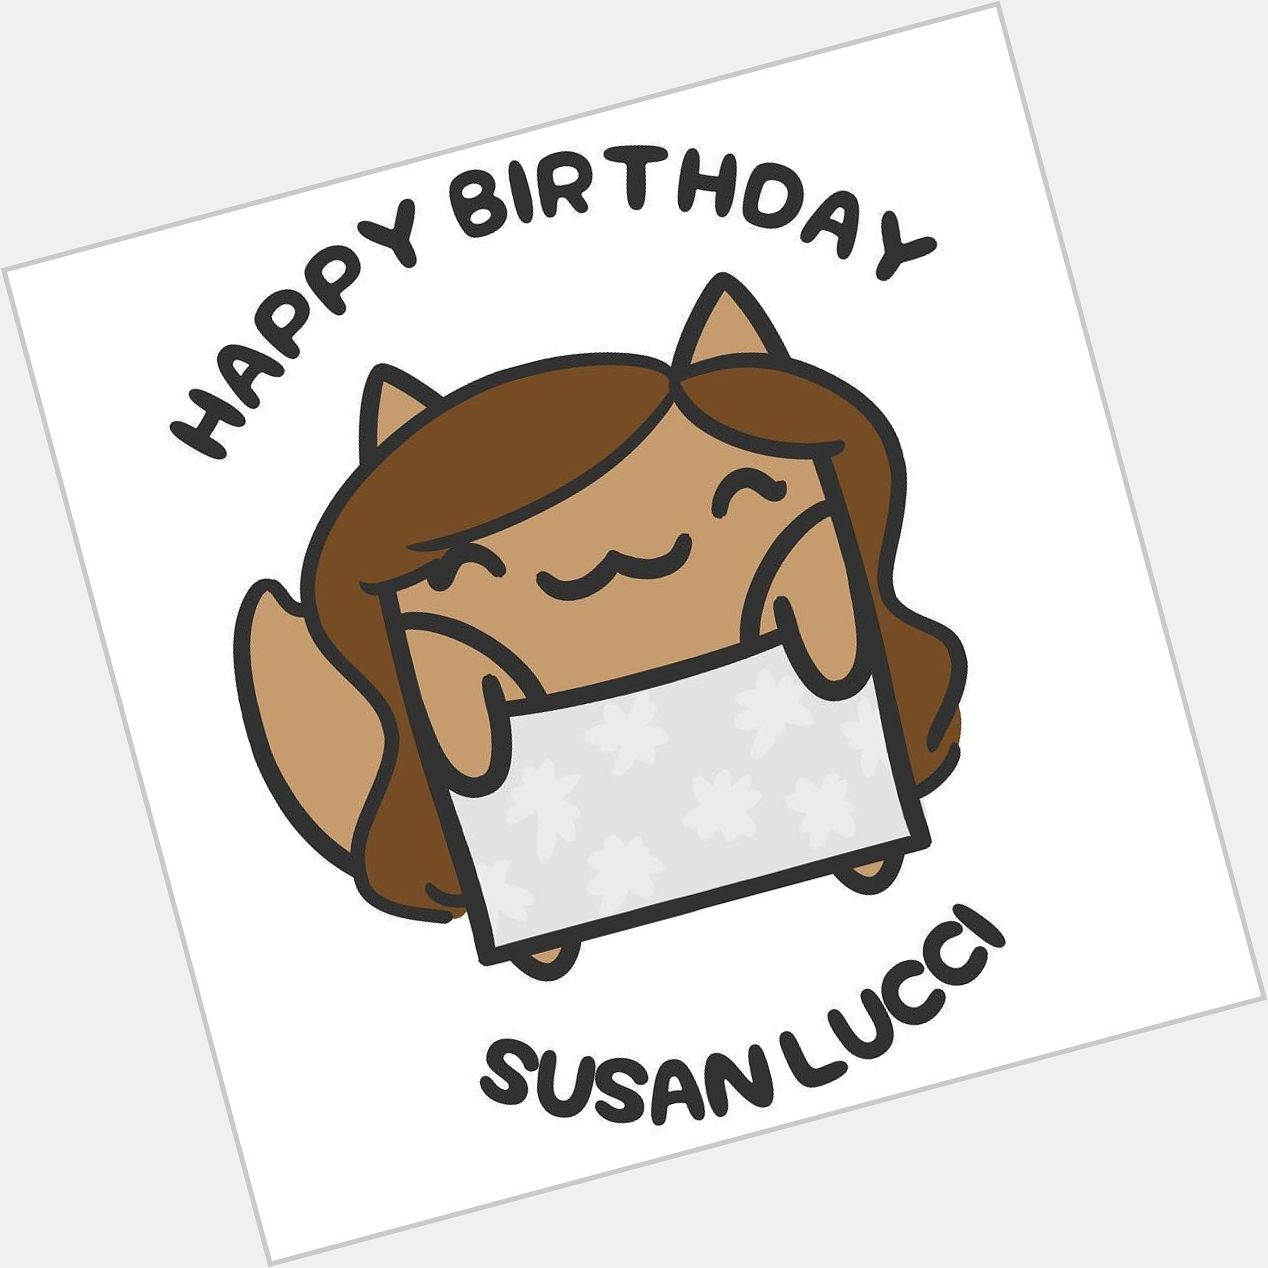 Happy Birthday, Susan Lucci! I did this one for my mom, who was always a big fan of the so 